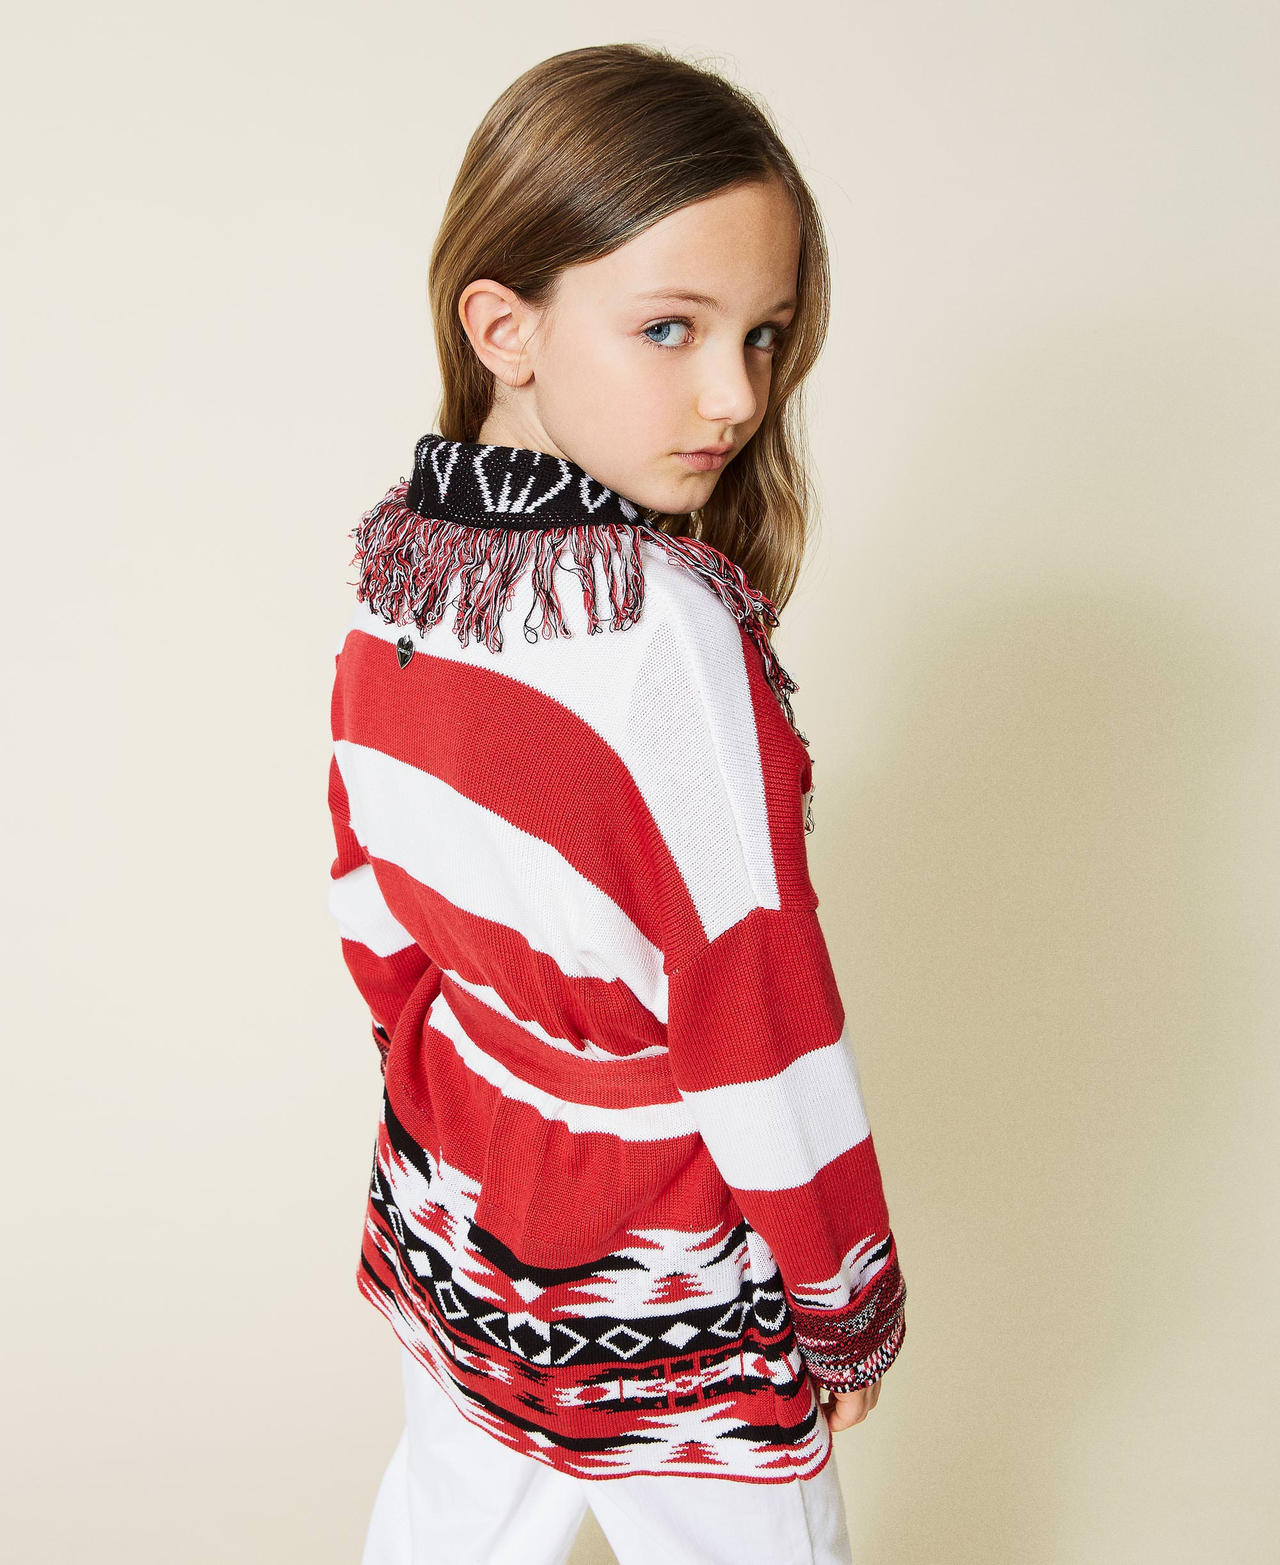 Jacquard cardigan with fringes "Fire Red" / Black / Off White Ethnic Jacquard Girl 221GJ318A-03